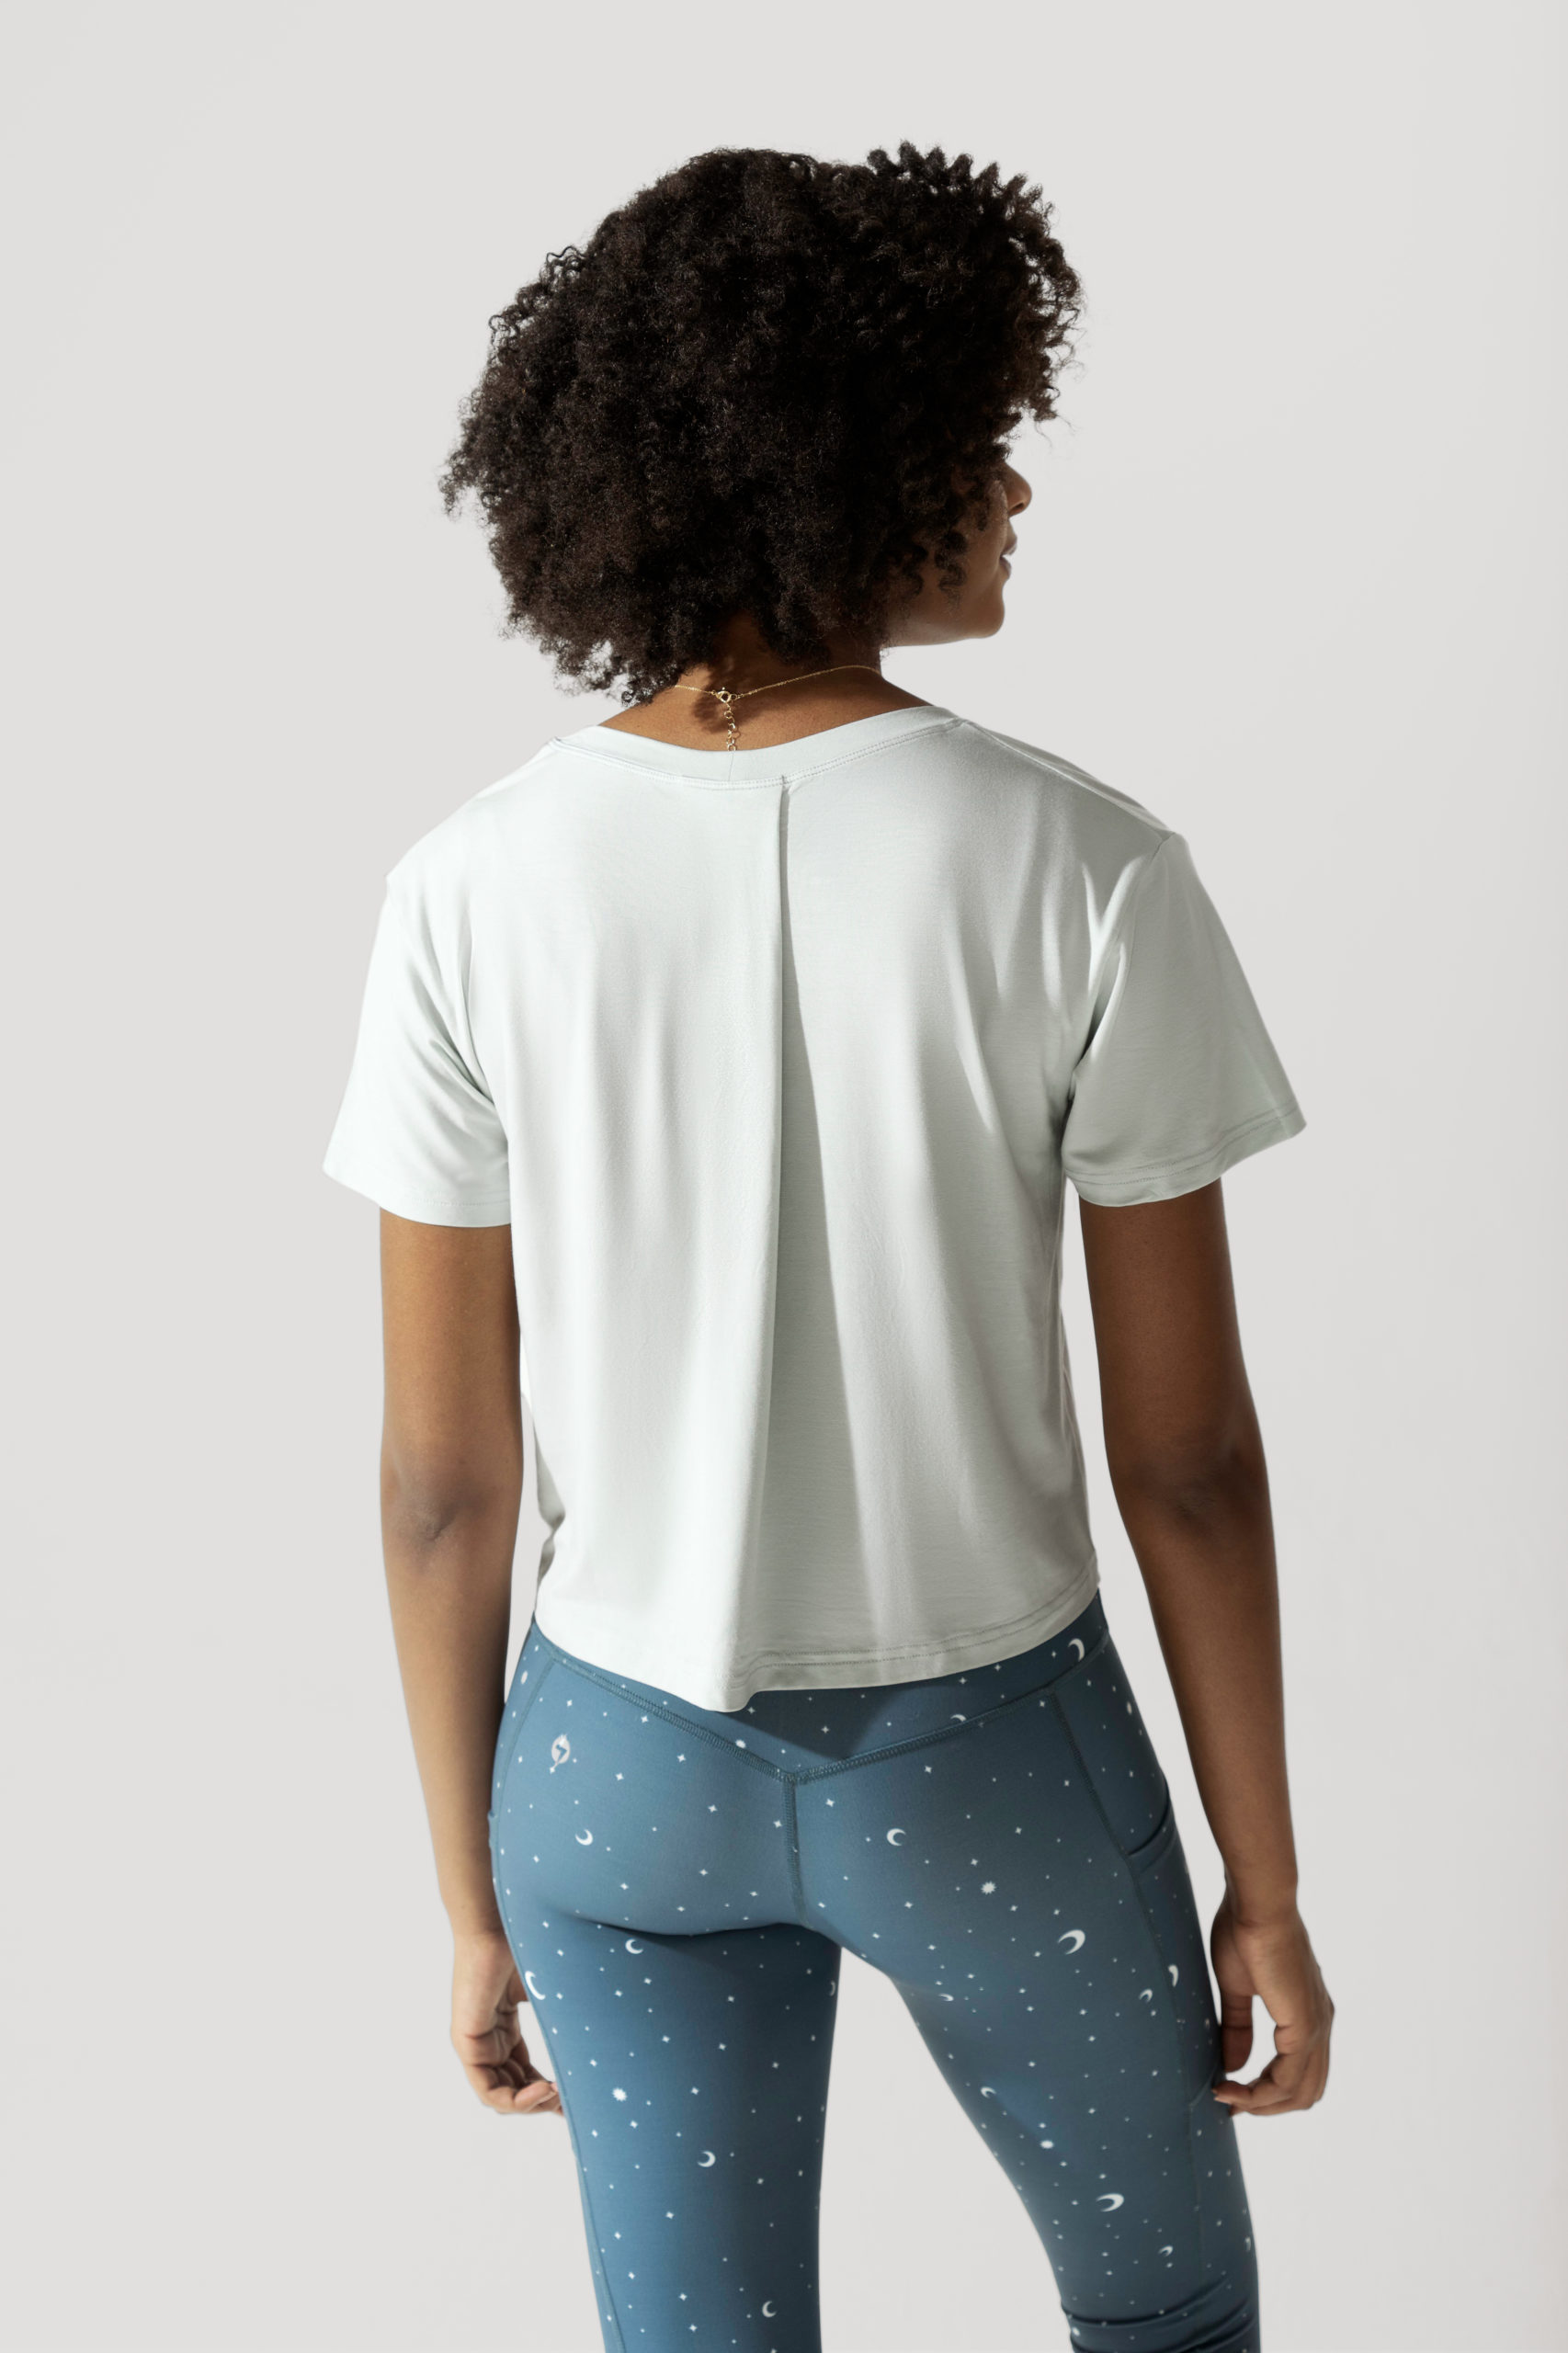 popflex active morning tee dew back view with ultimate hourglass leggings pocket teal constellation